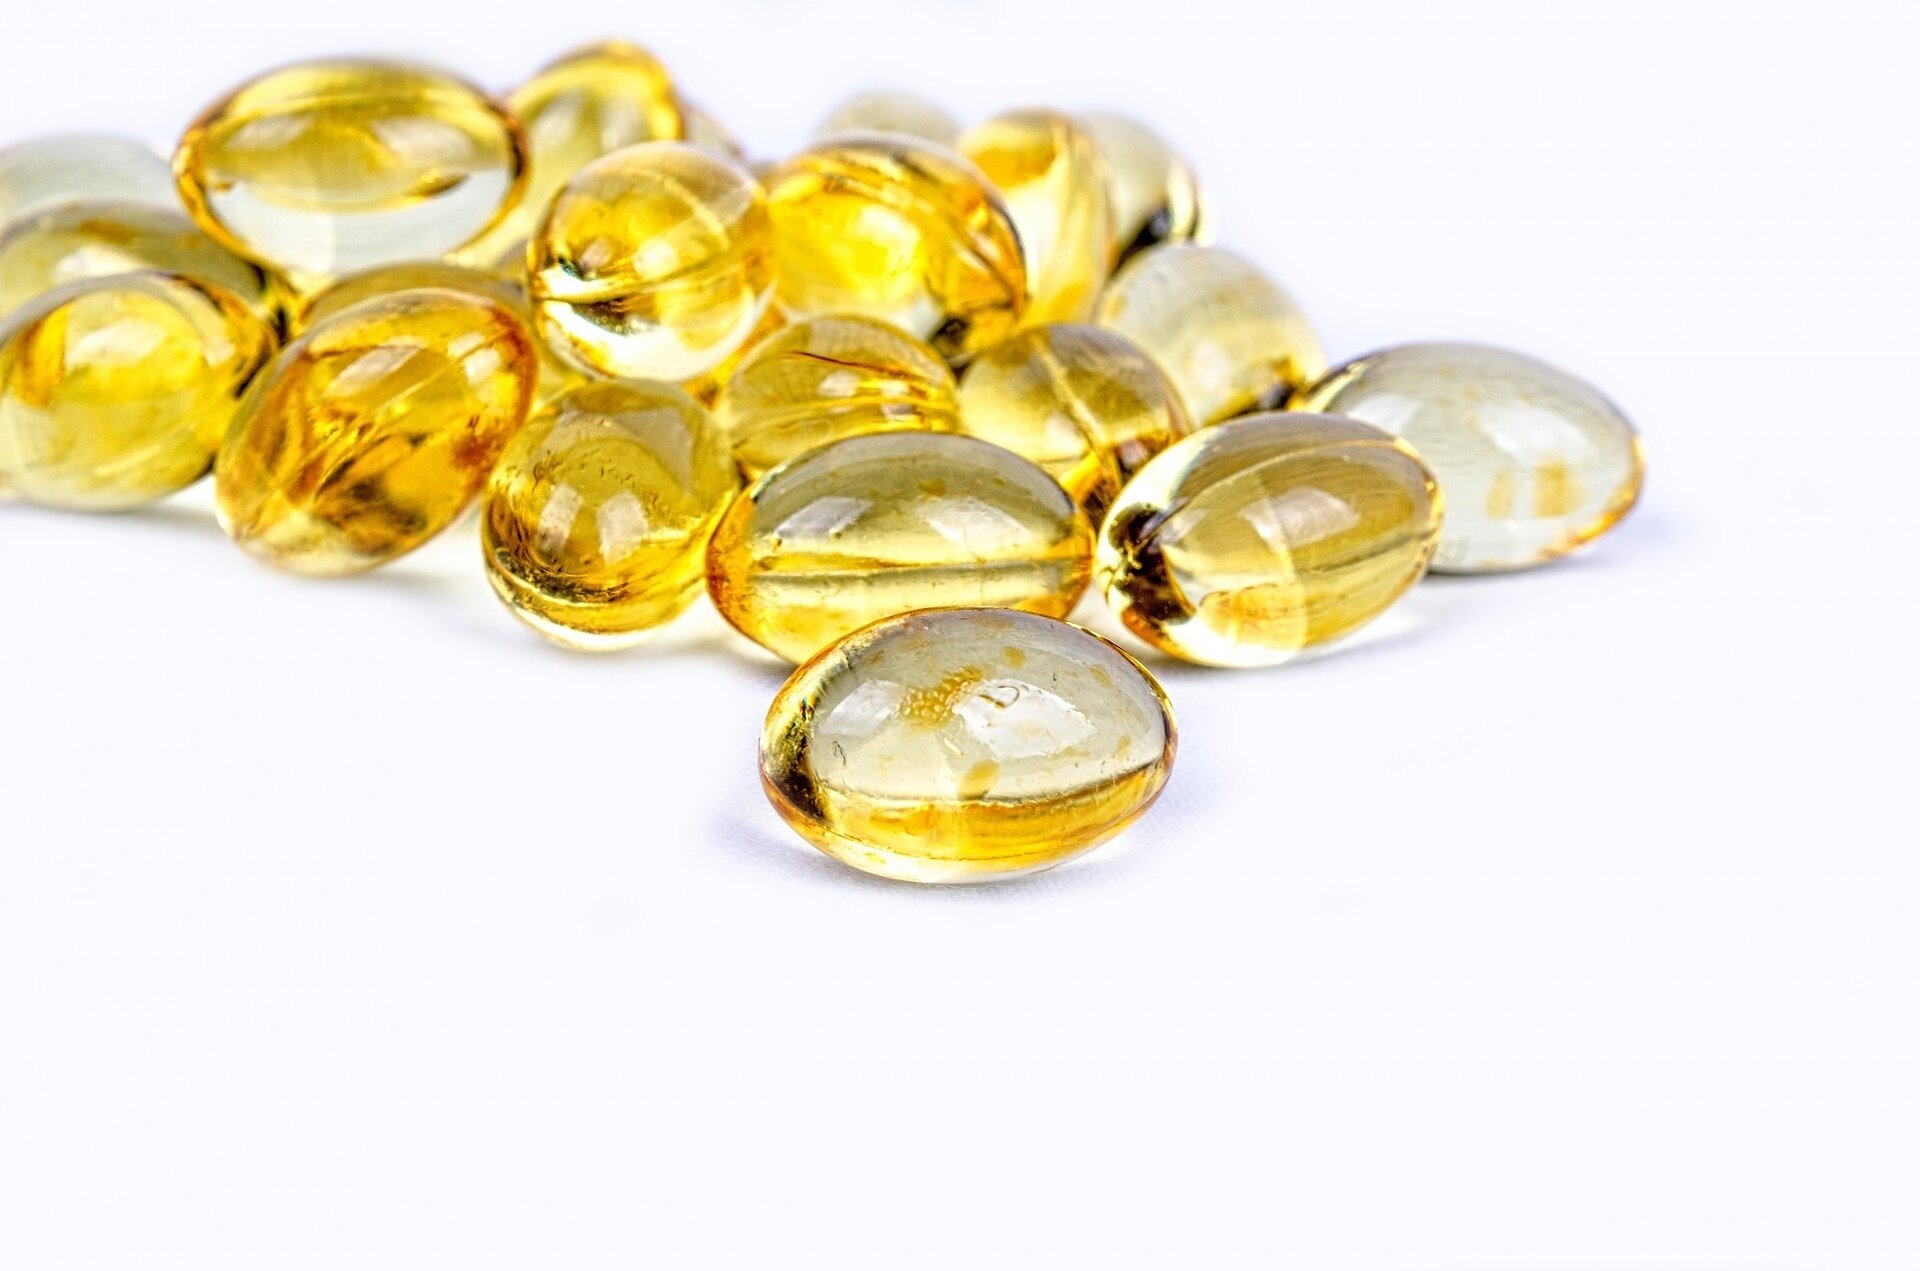 Researchers get the best out of the daily dose of fish oil